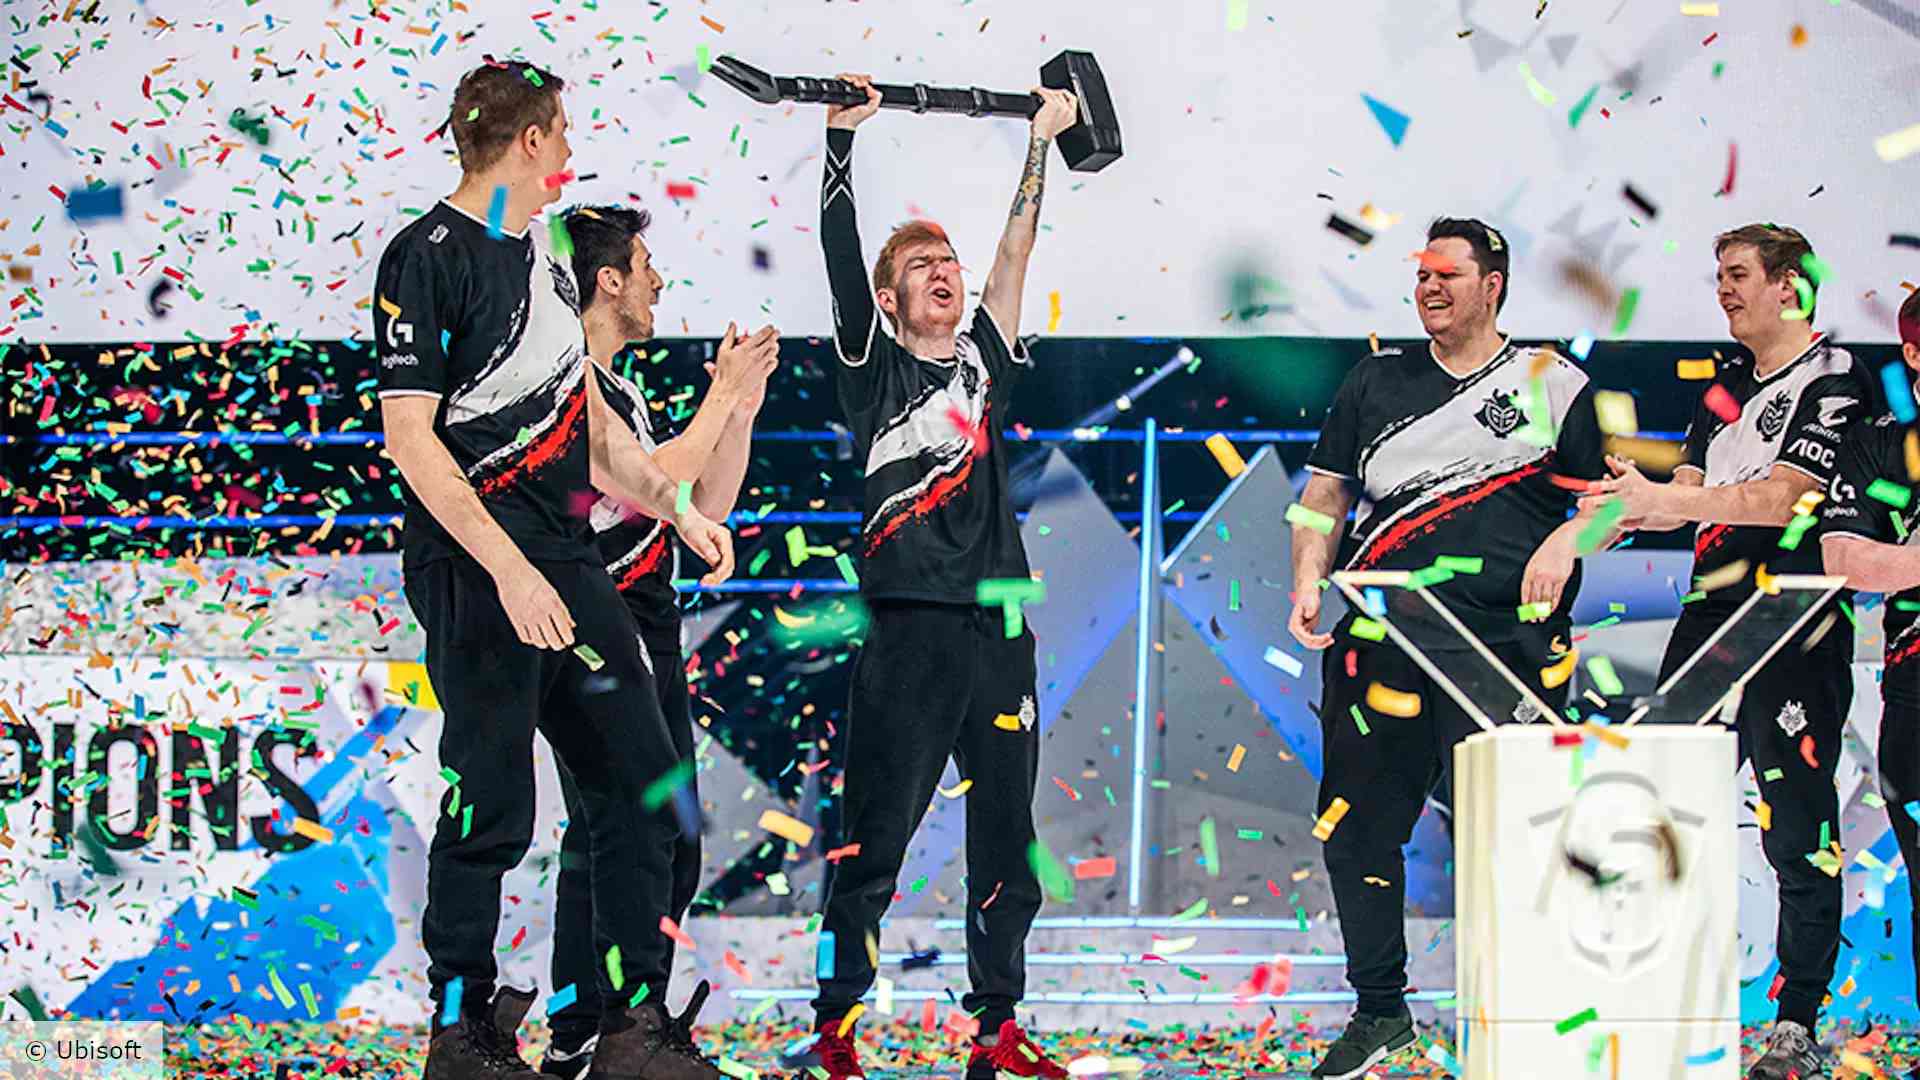 The 2019 iteration of G2's Rainbow Six roster celebrates with the trophy after winning the Six Invitational 2019 